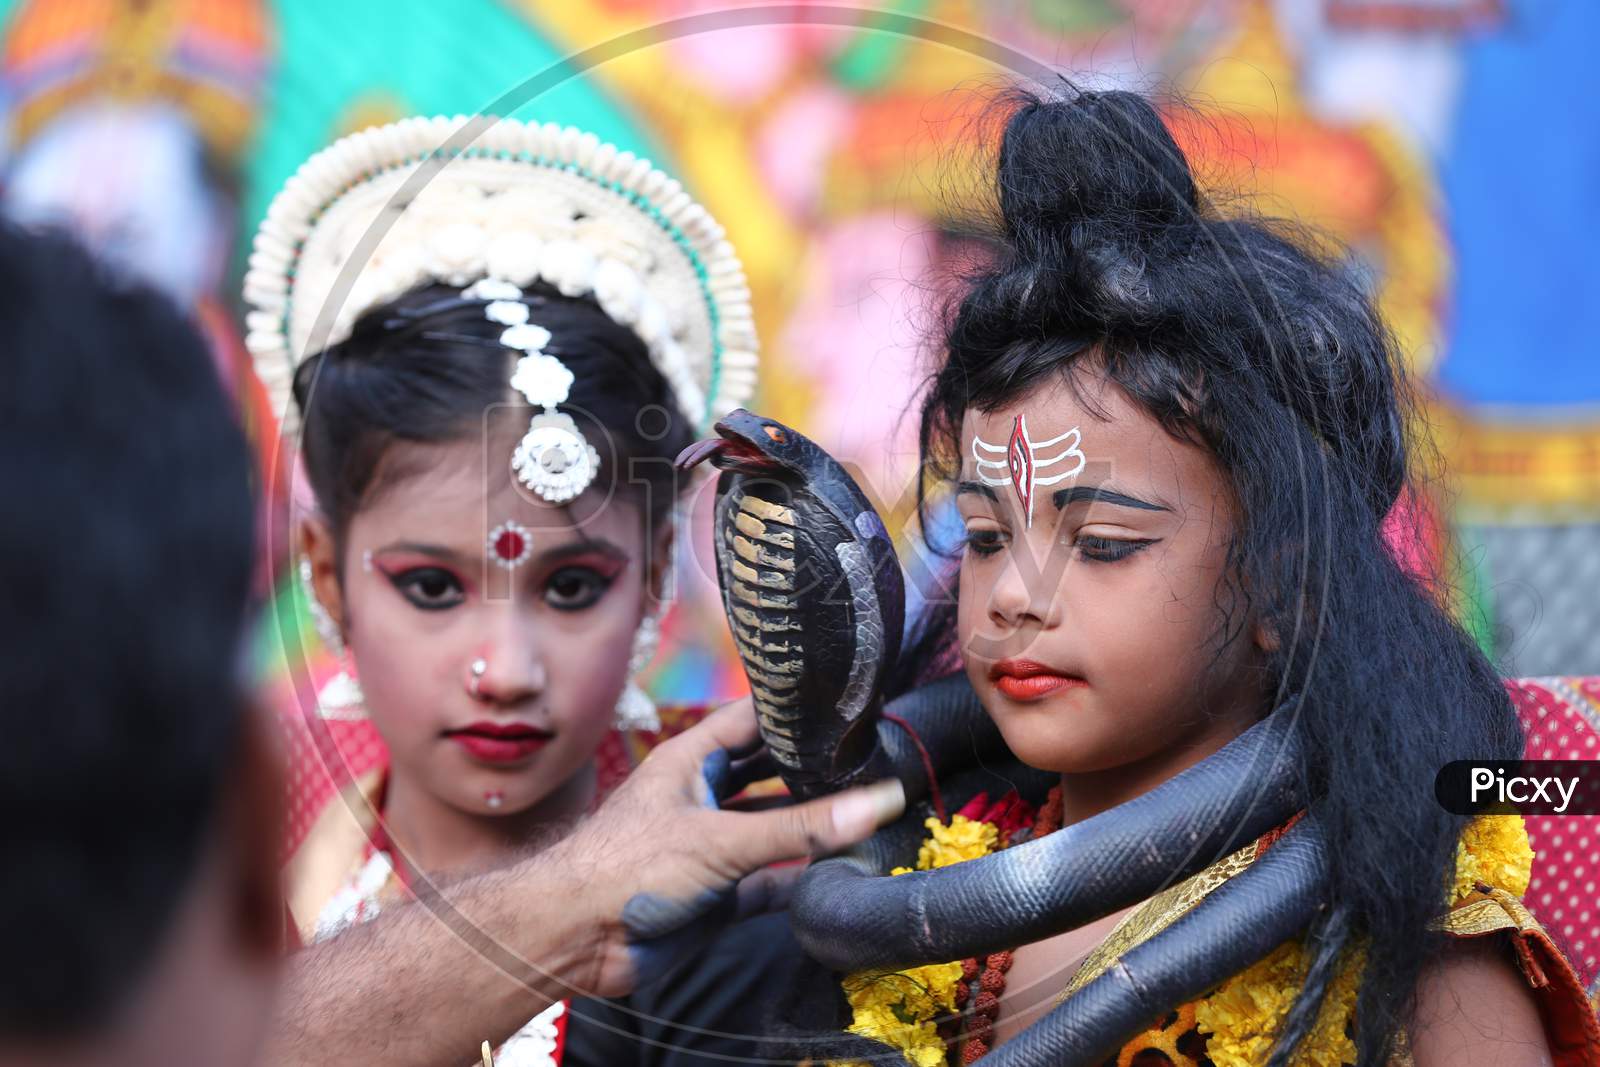 Indian Young Children Portraying Indian Mythological Characters And Indian Gods  In Pushkar Fair, Pushkar